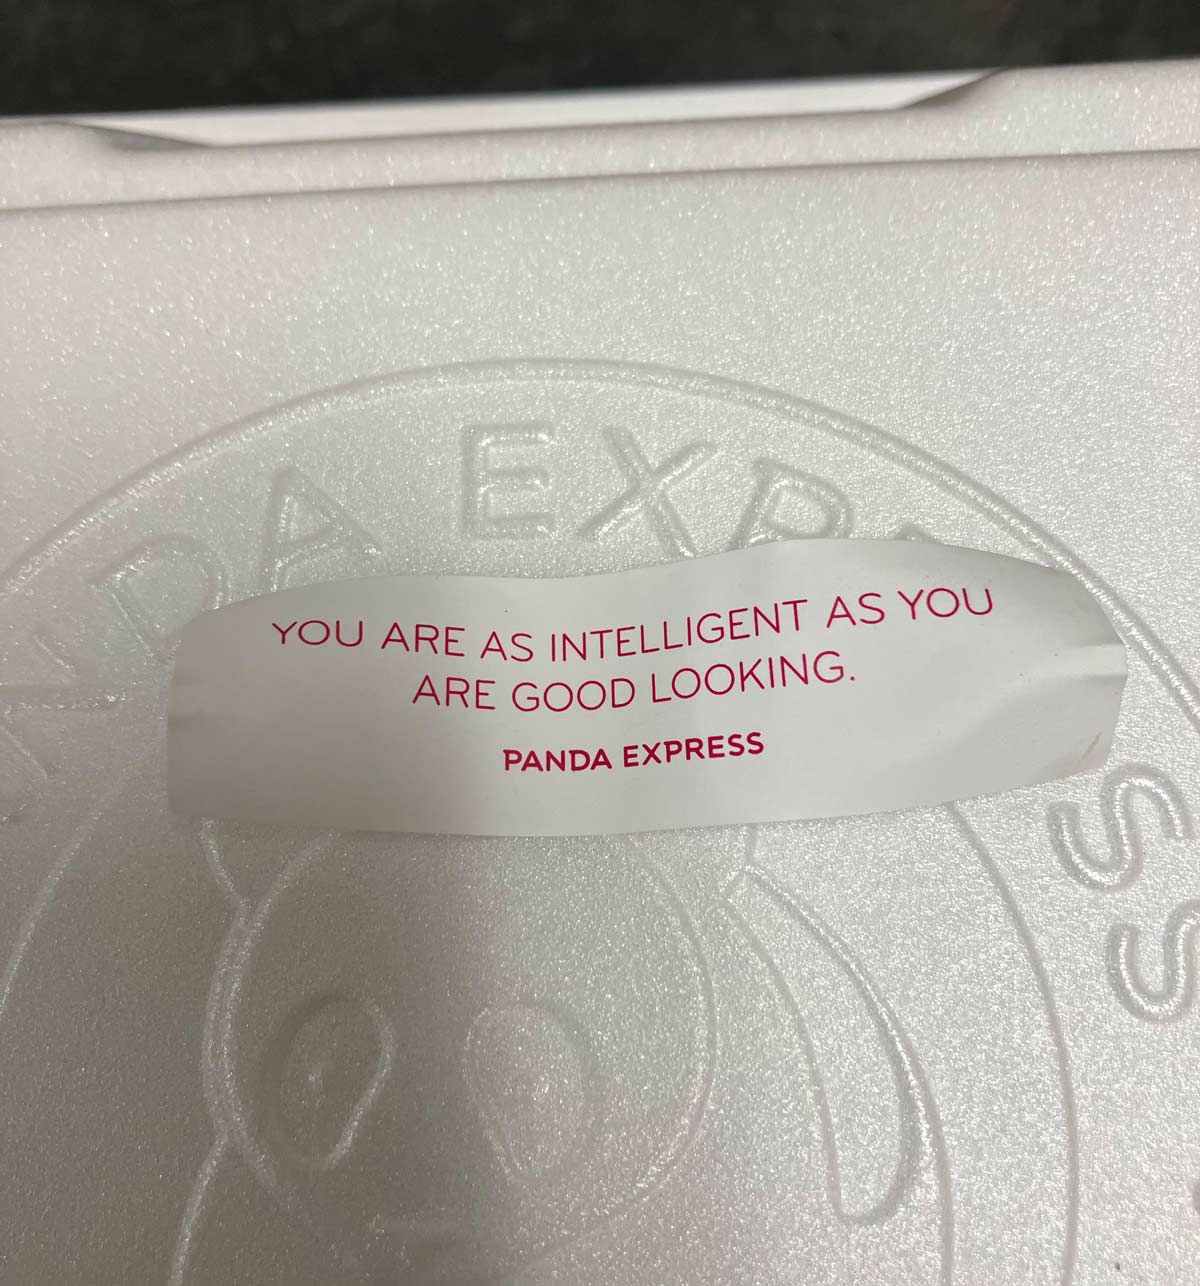 Panda calling me out twice in one sentence!